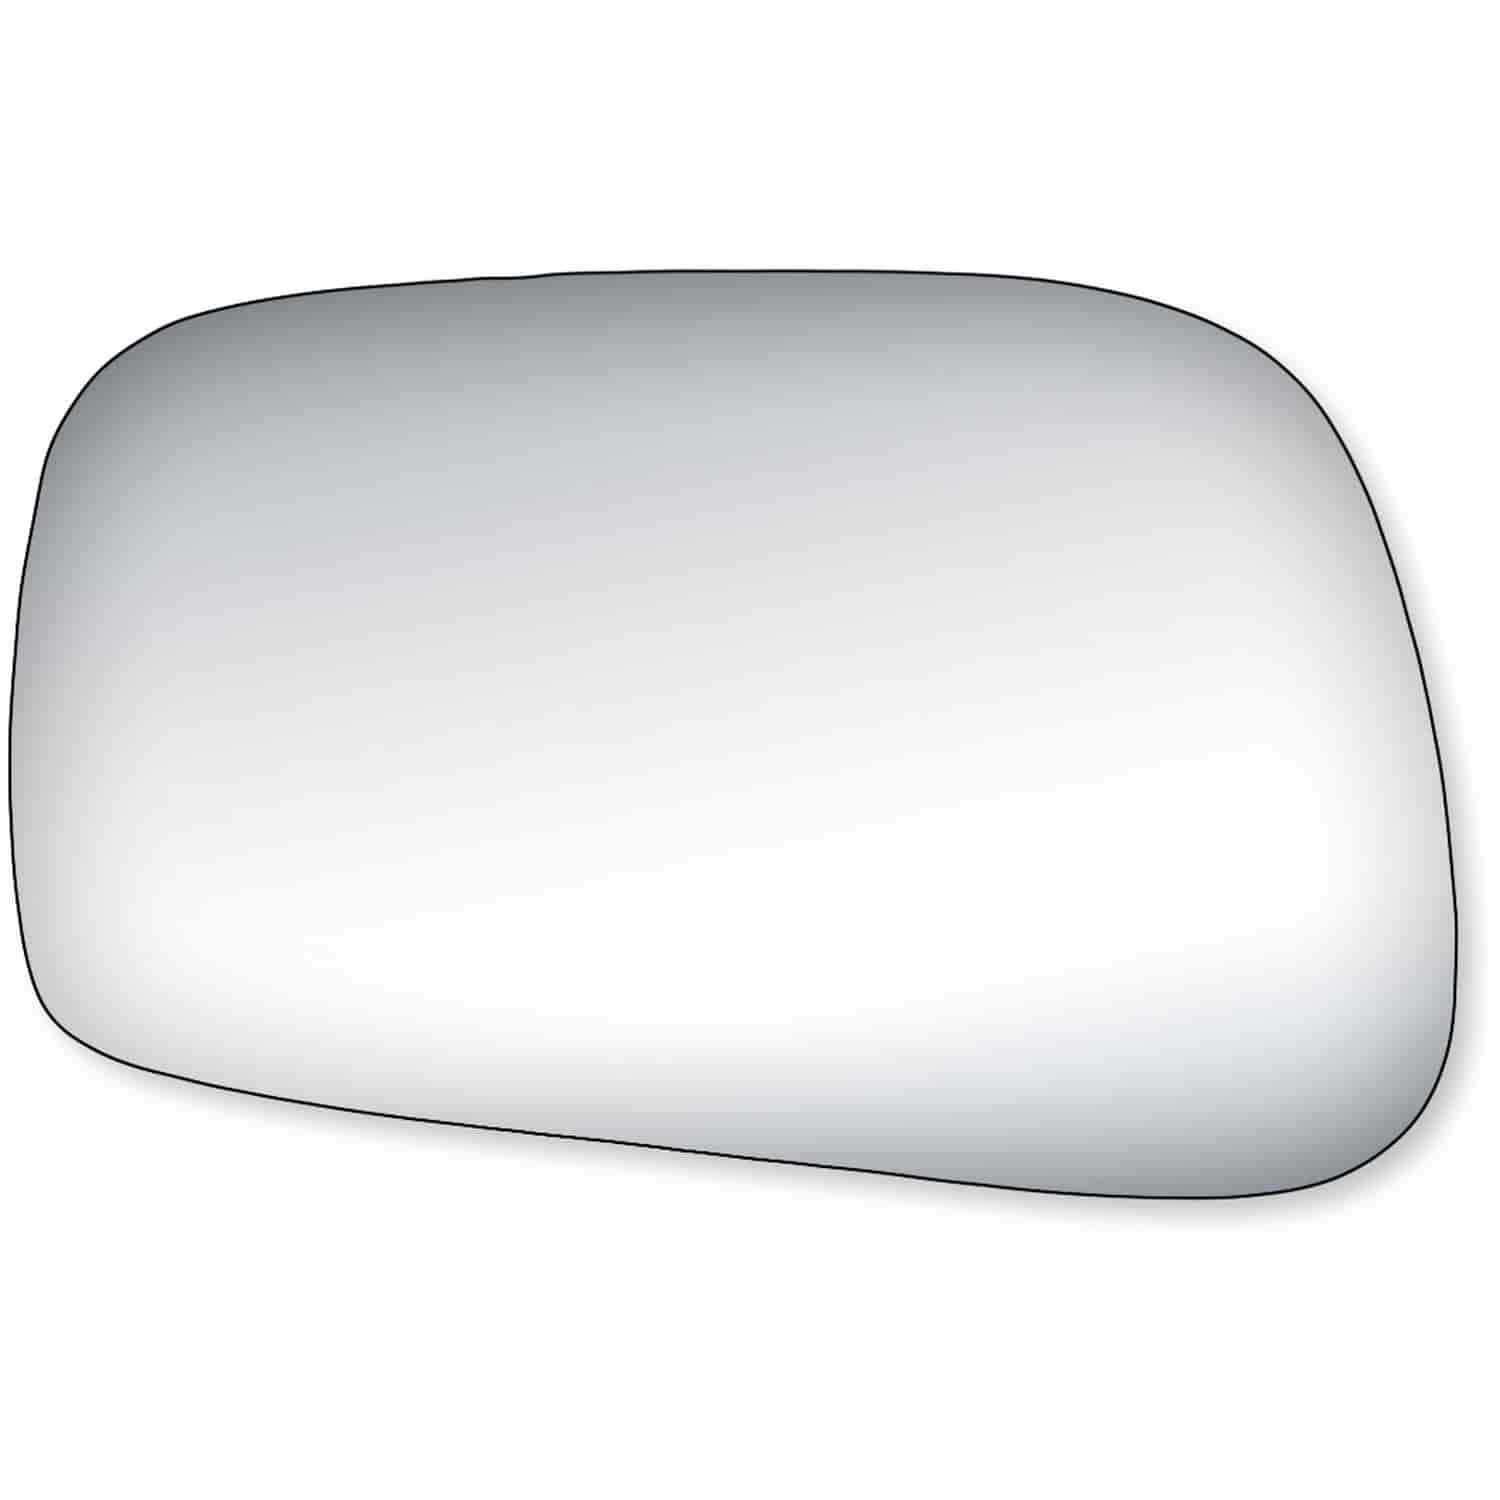 Replacement Glass for 03-08 Corolla; 03-08 Matrix the glass measures 4 1/8 tall by 6 11/16 wide and